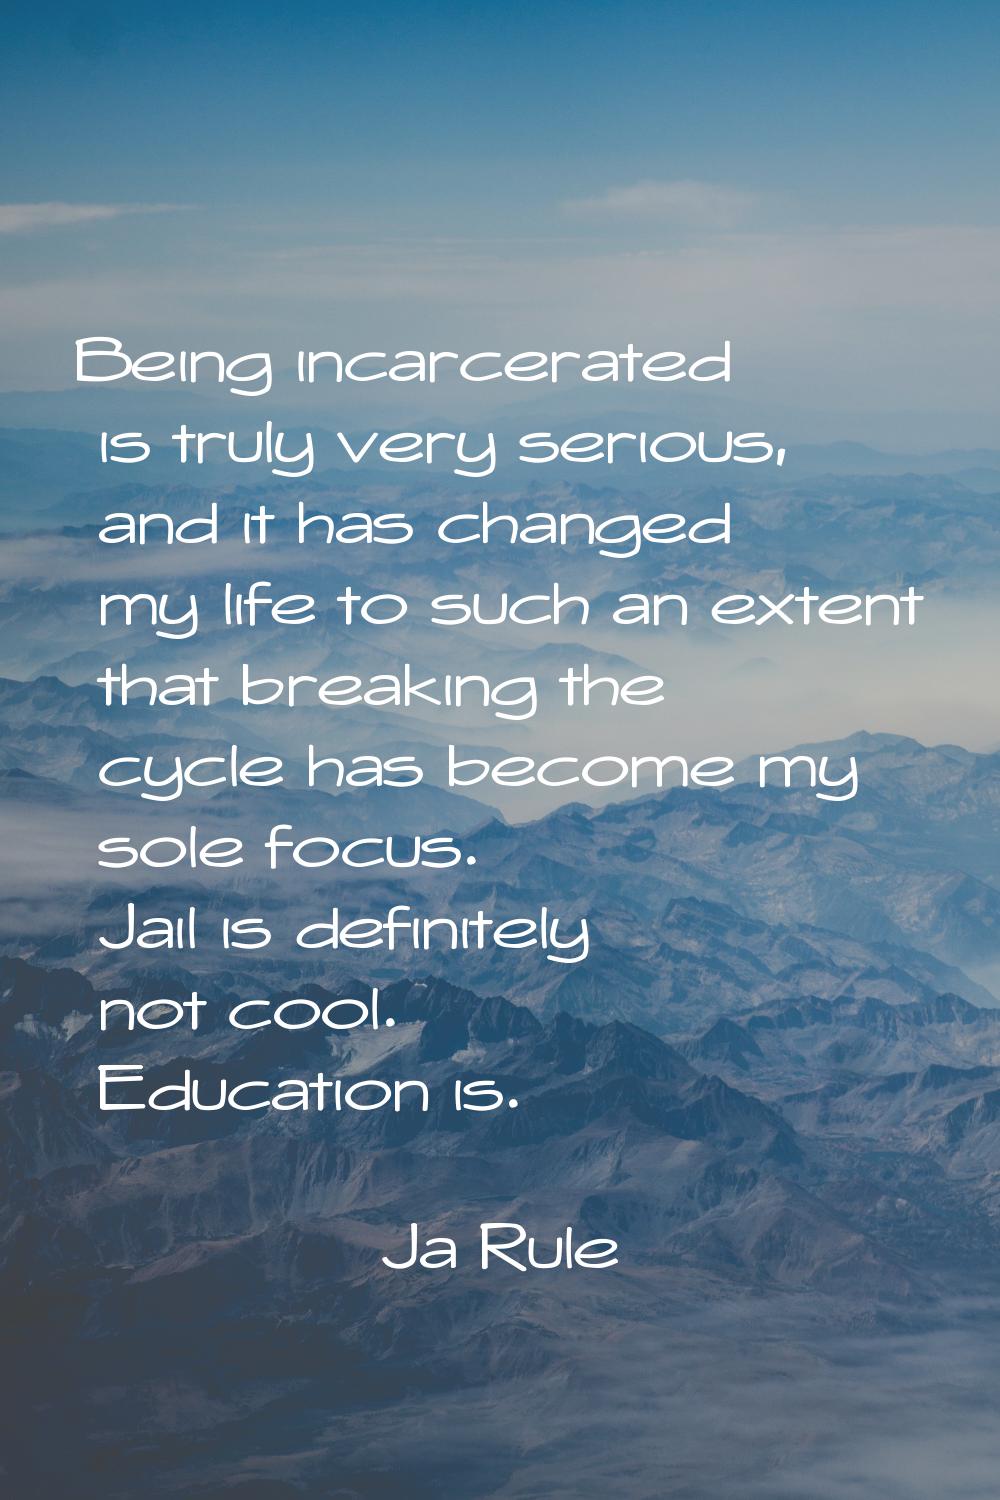 Being incarcerated is truly very serious, and it has changed my life to such an extent that breakin